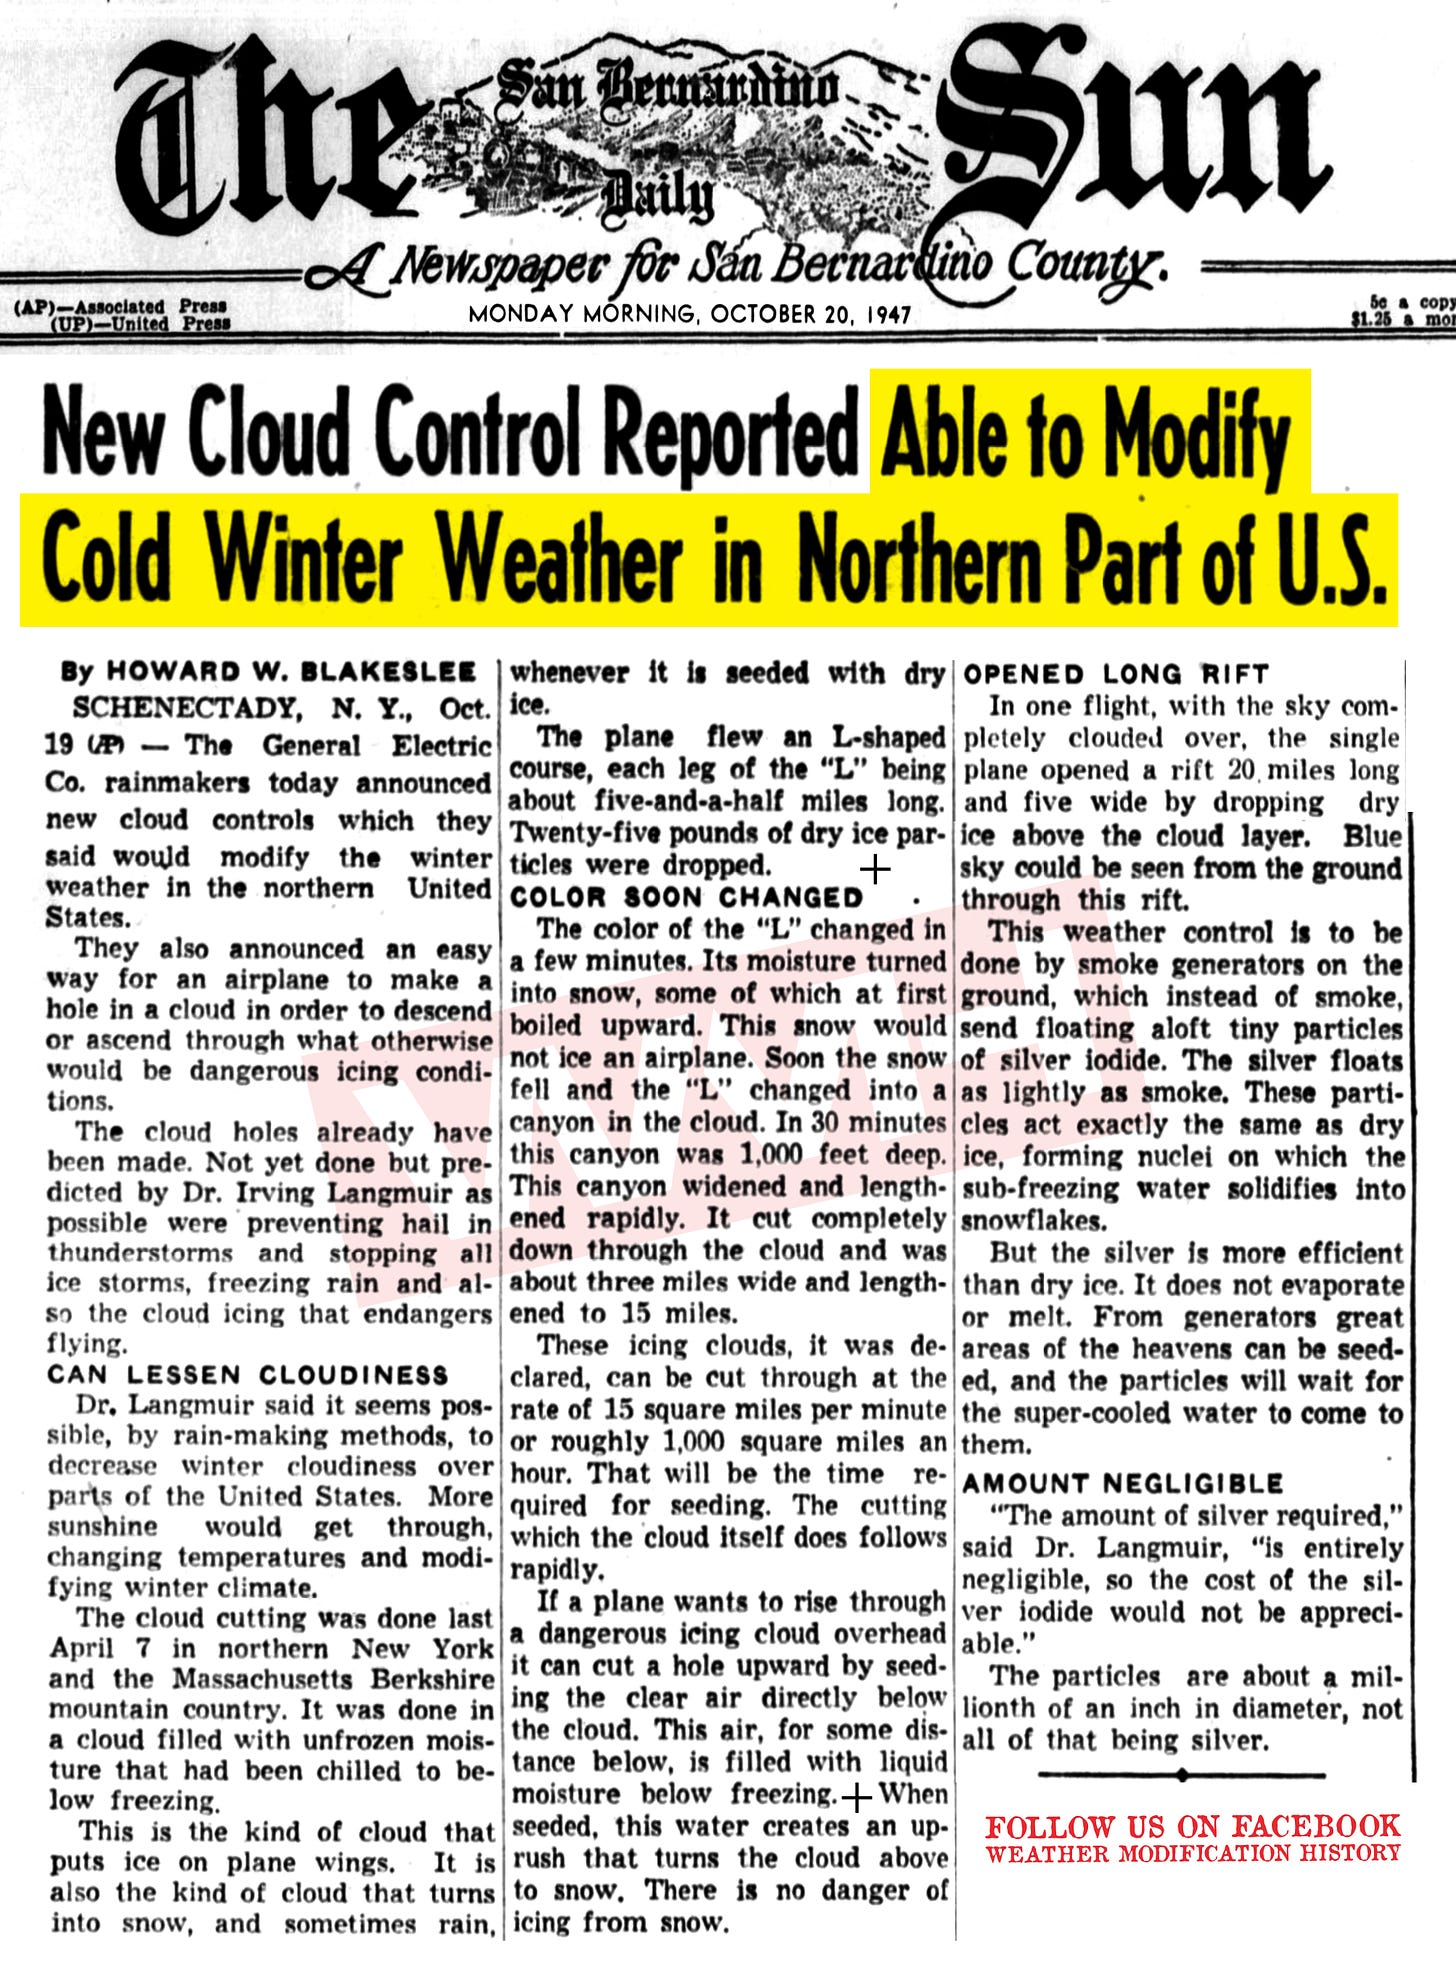 1947-101-20-New-Cloud-Control-Reported-Able-to-Modify-Cold-Winter-Weather-in-Northern-Part-of-USA